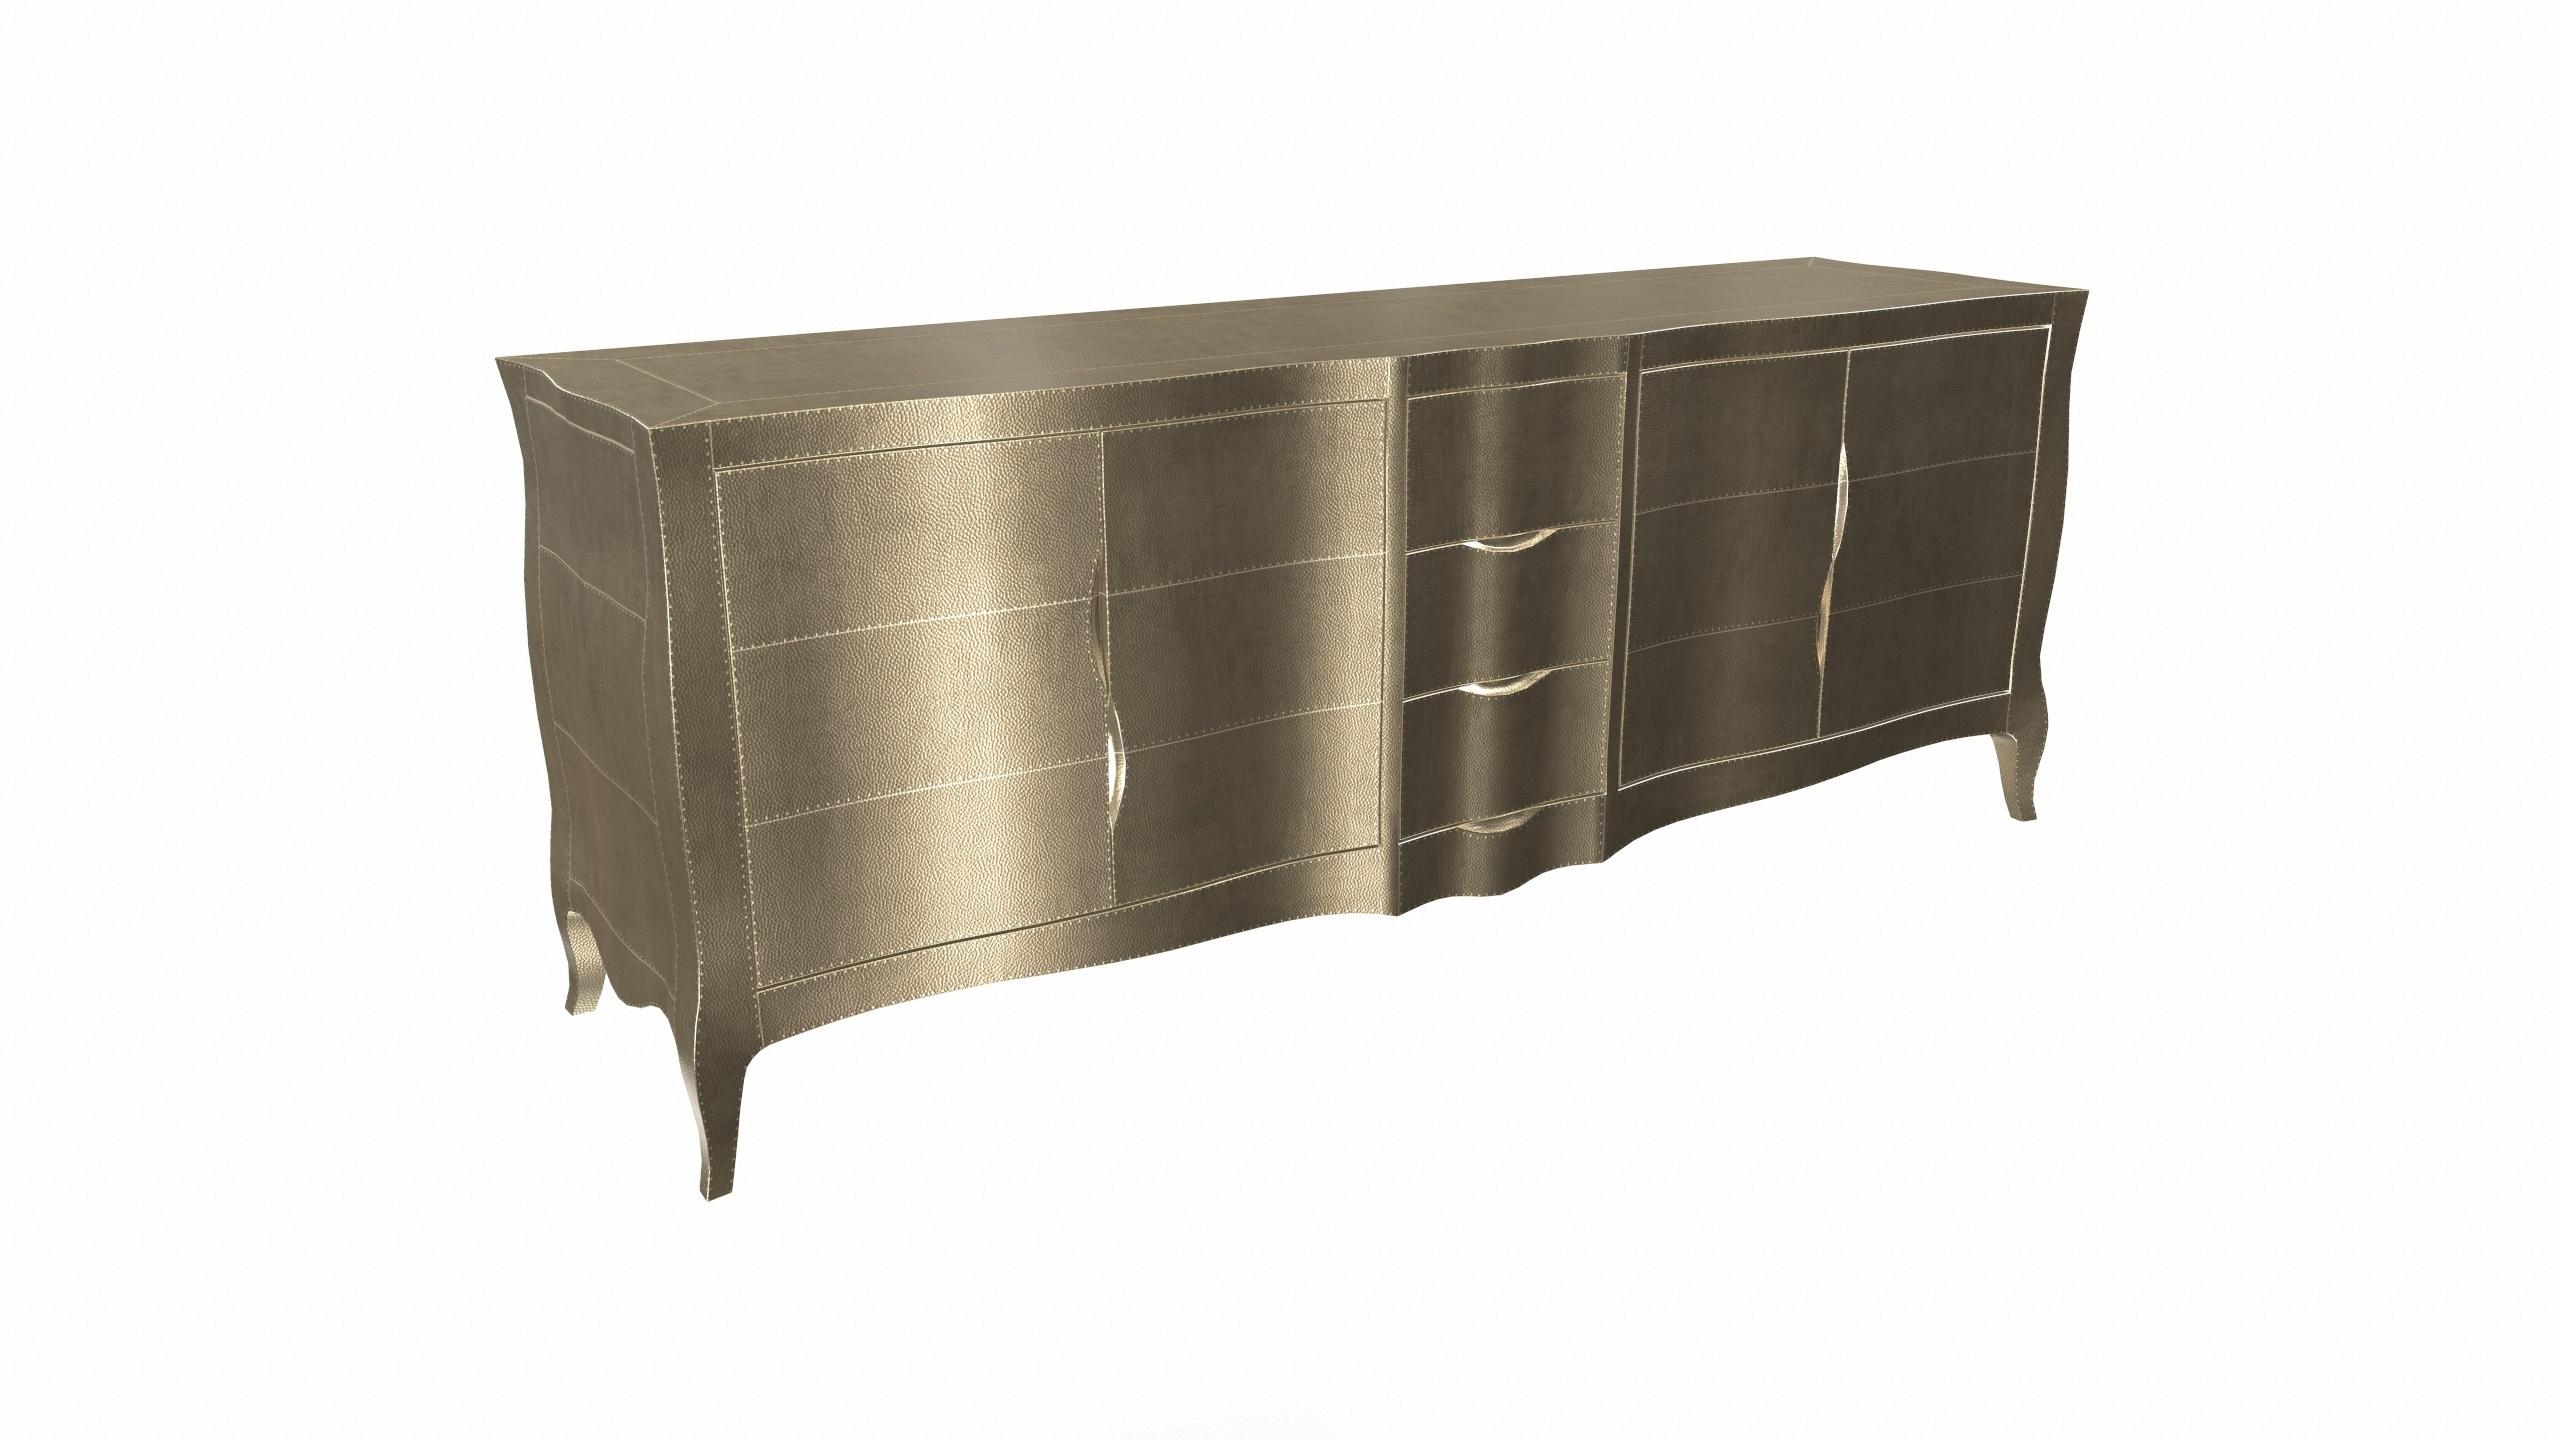 Contemporary Louise Credenza Art Deco Dressers in Mid. Hammered Brass by Paul Mathieu For Sale